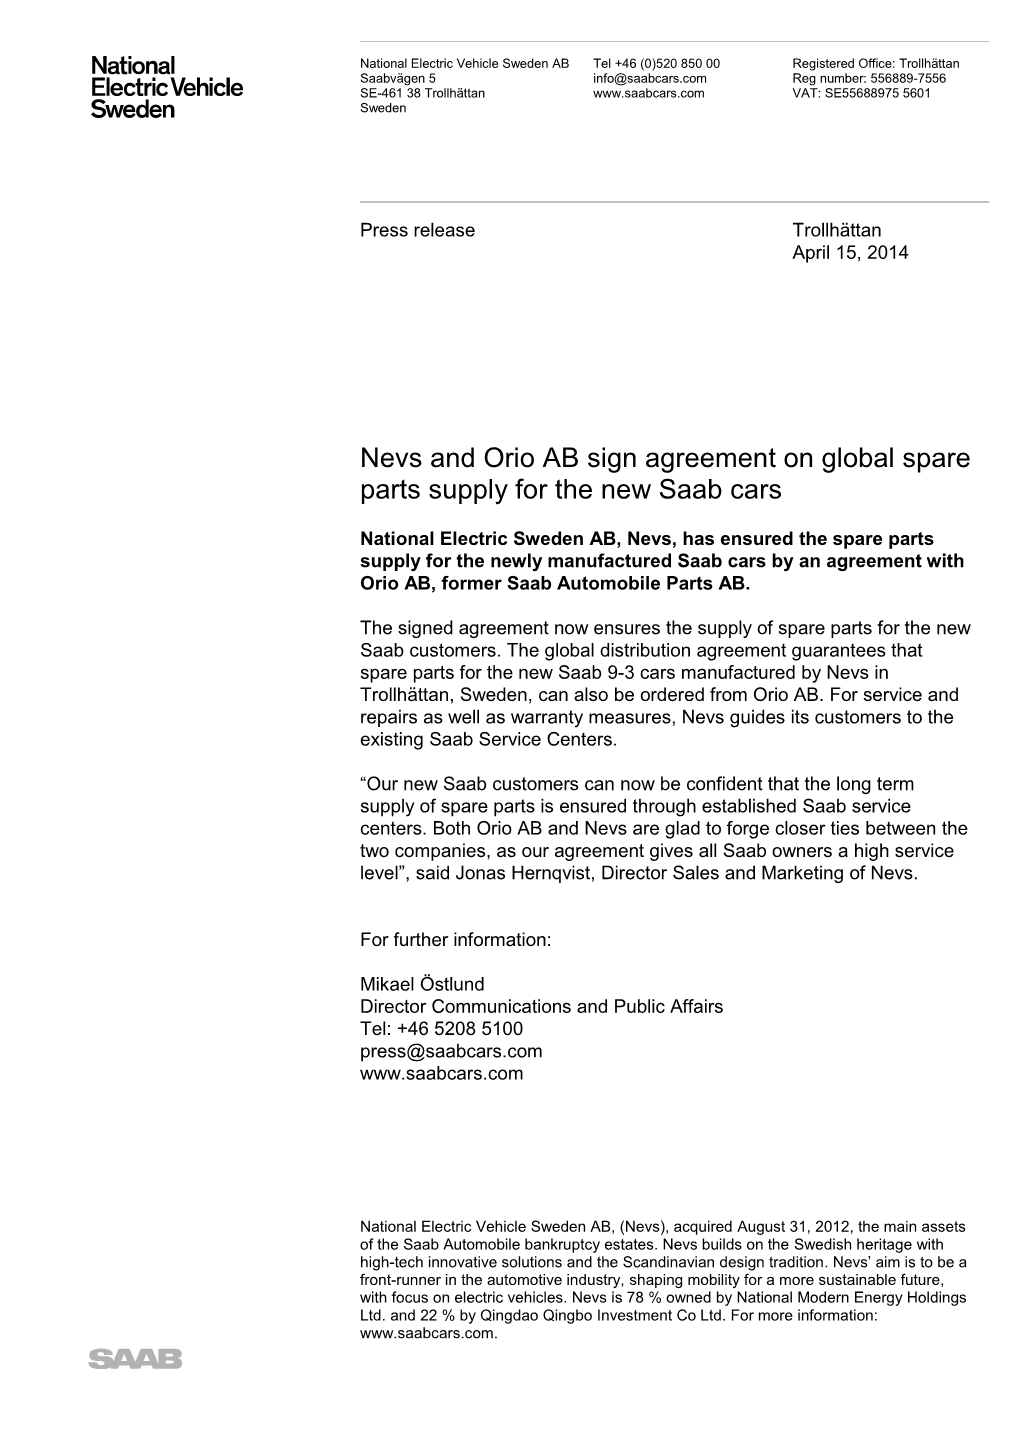 Nevs and Orio AB Sign Agreement on Global Spare Parts Supply for the New Saab Cars